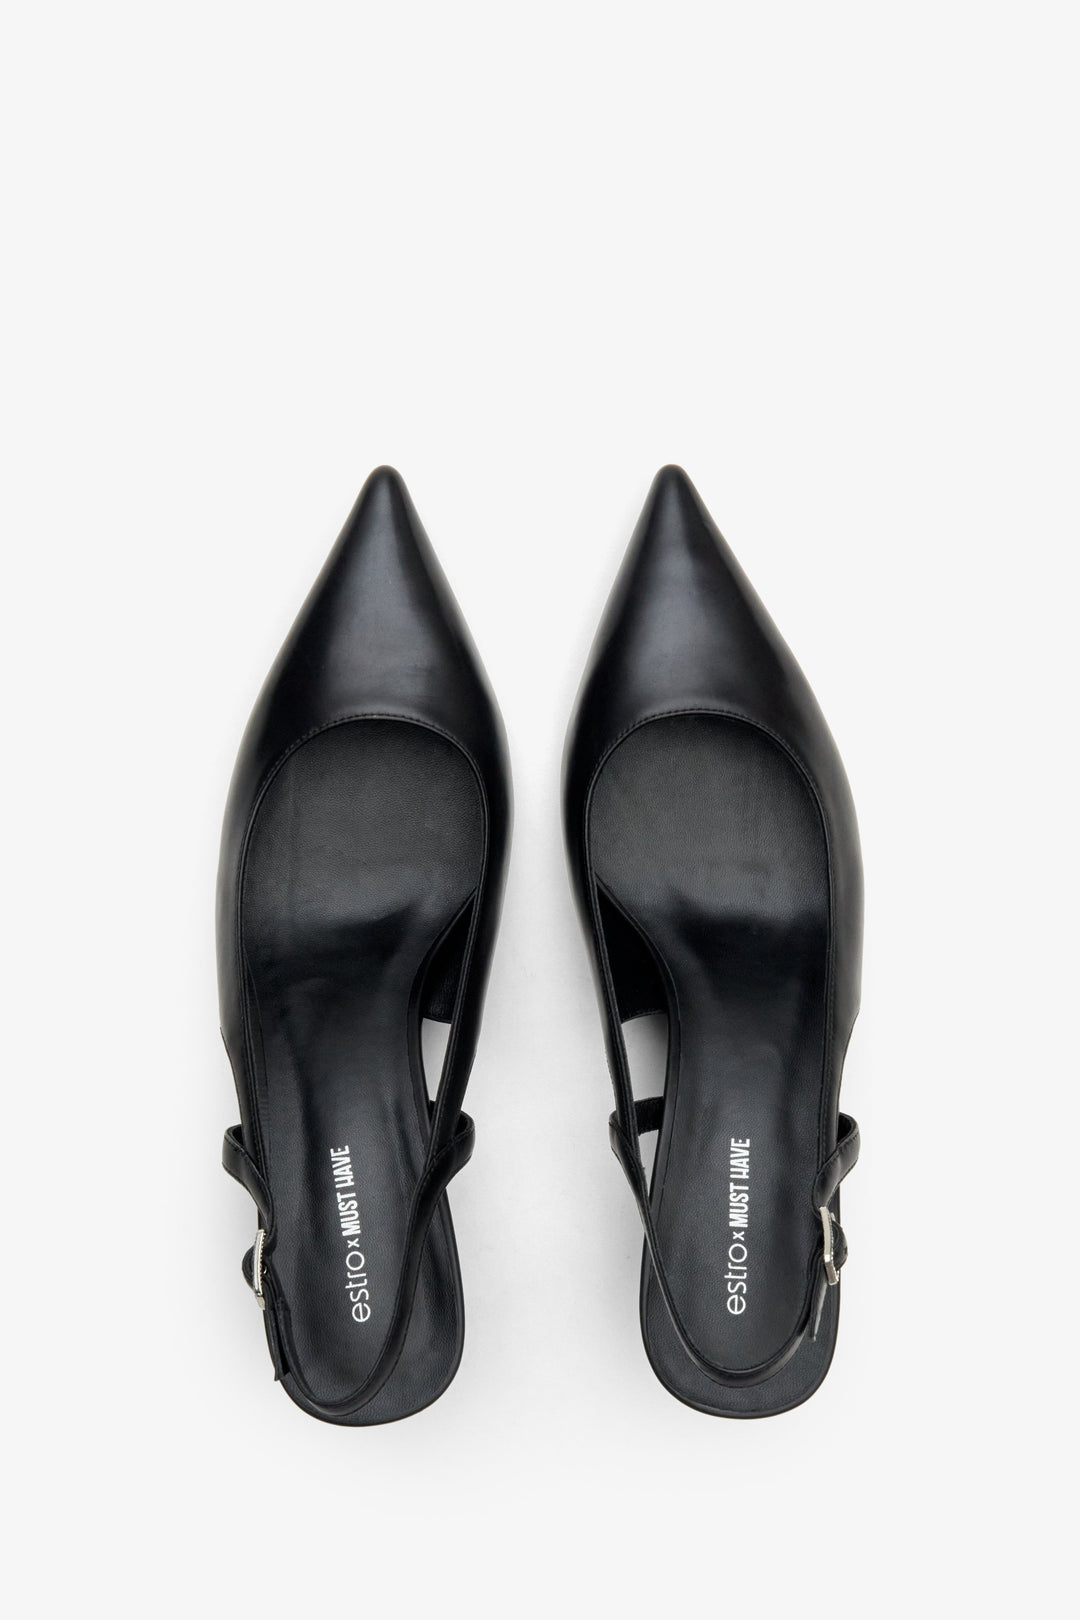 Estro x MustHave black leather slingback pumps - top view presentation of the footwear.